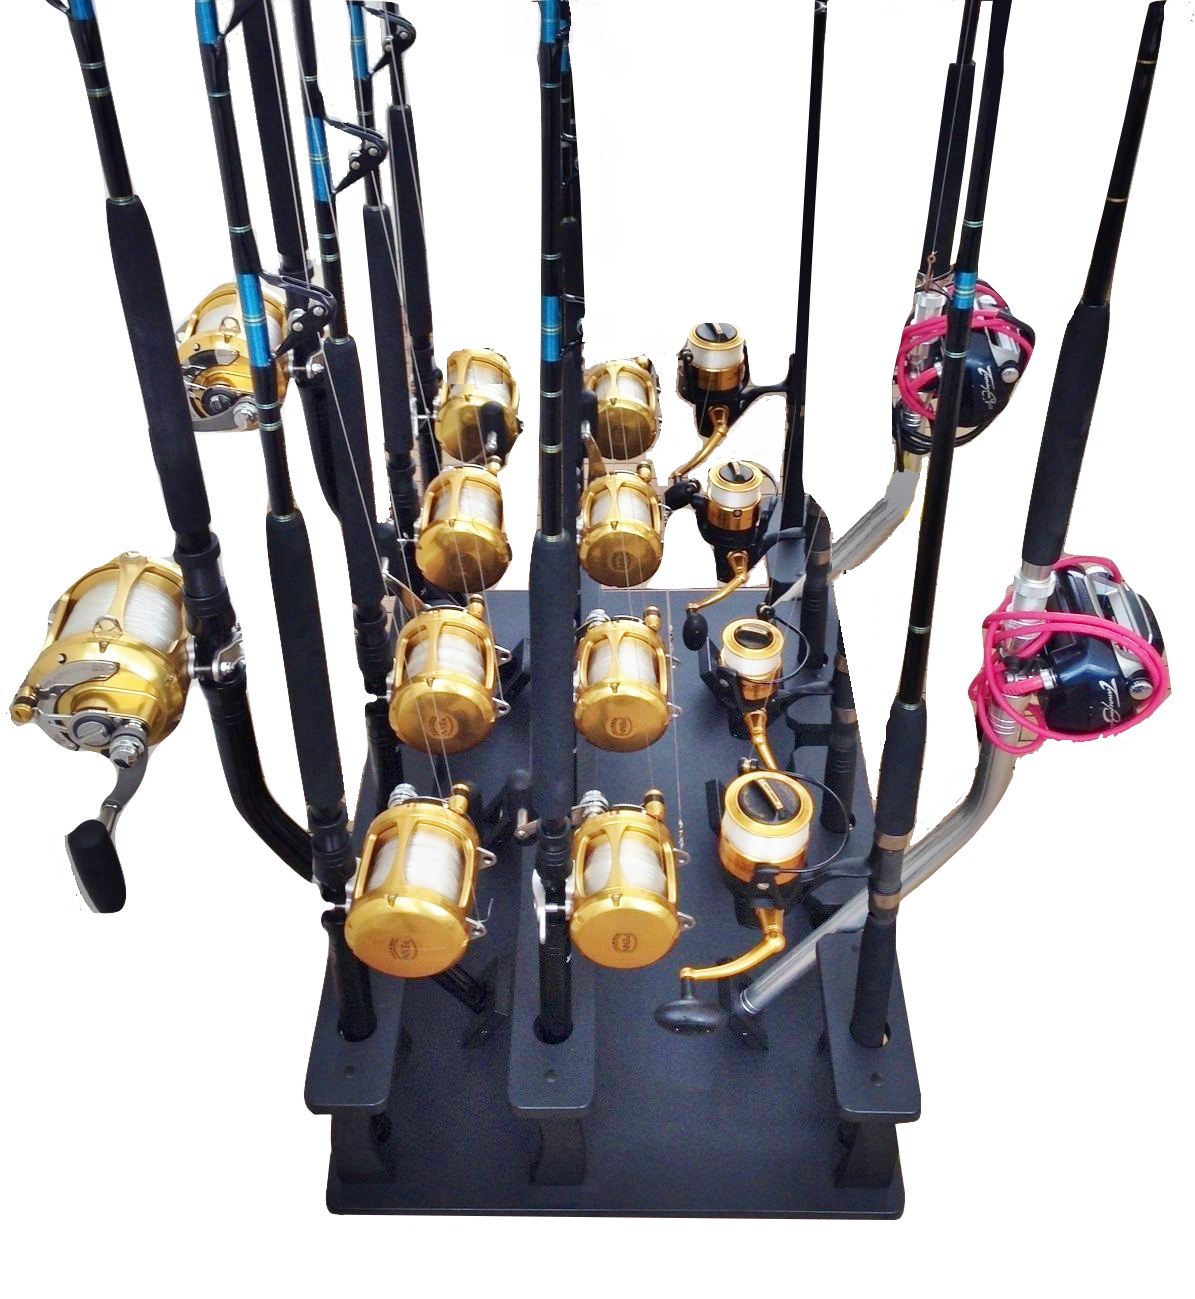 Curved Butt Rod Rack for 5 and a Deep Drop Pole Holder for 6 Rods and Reels